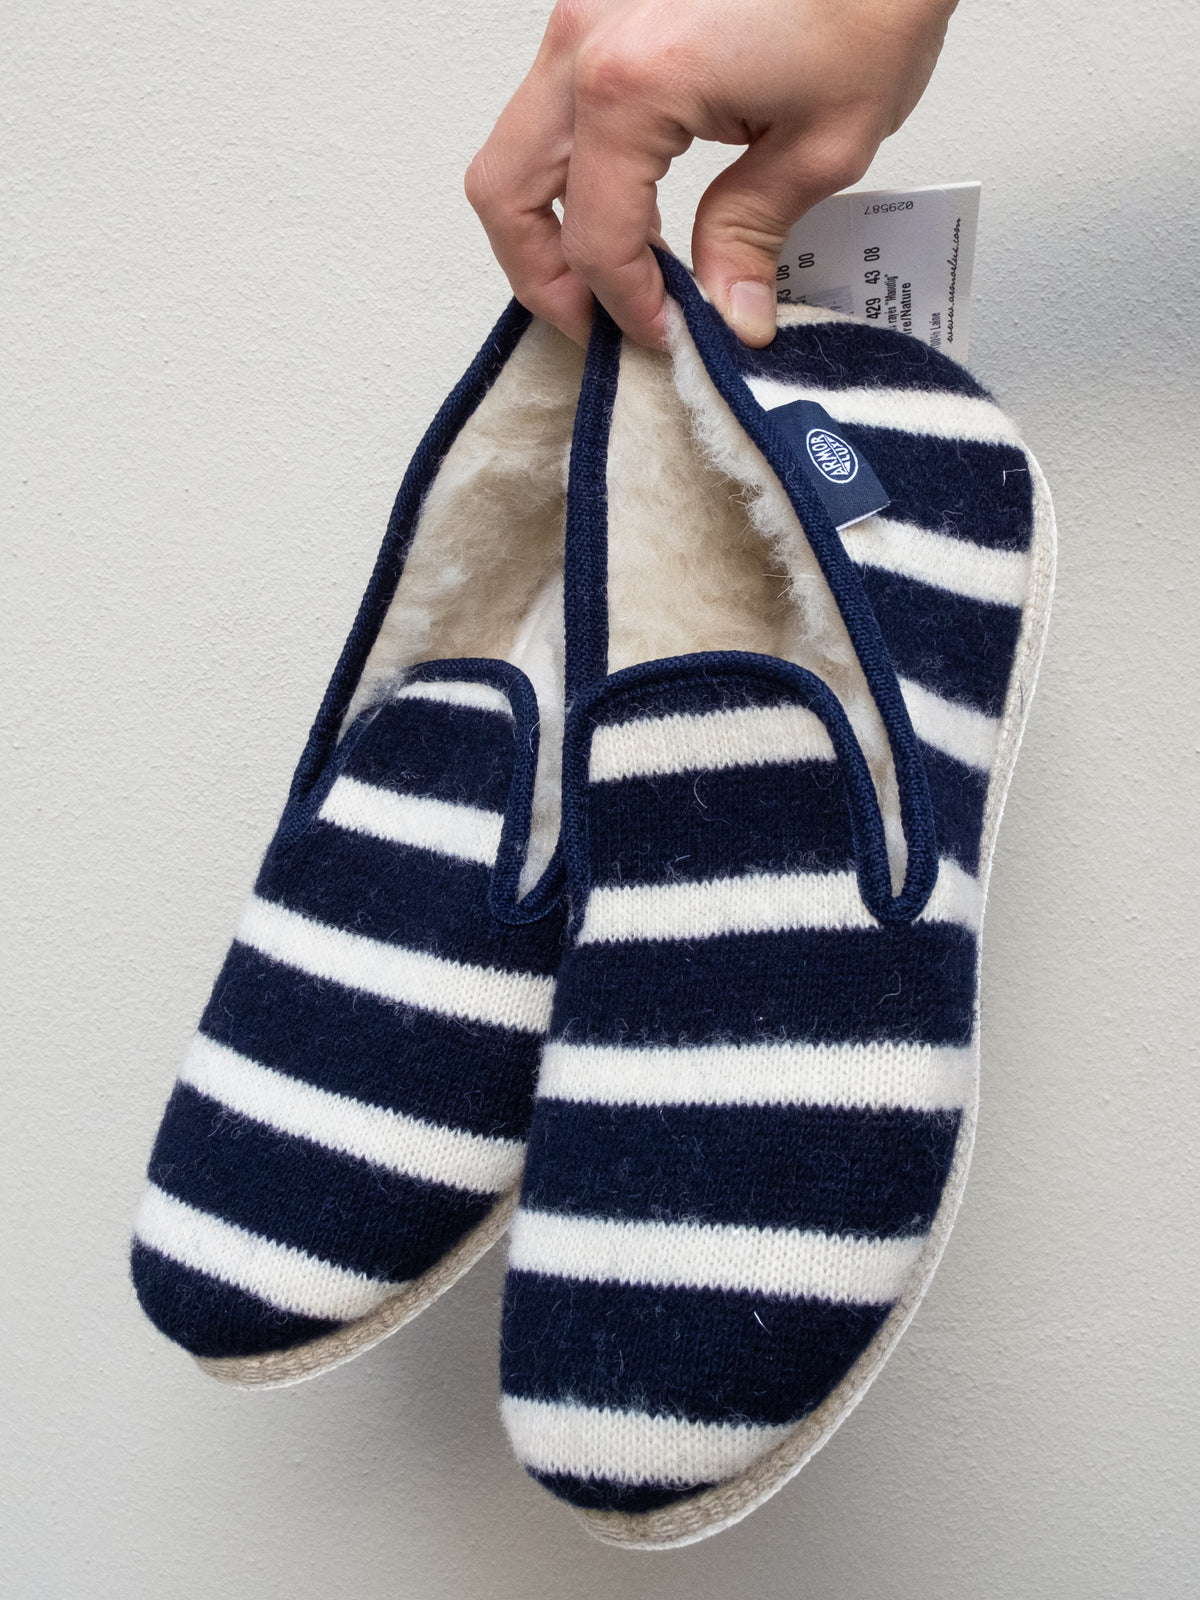 Armor Lux Striped slippers - Navy/White (0501)